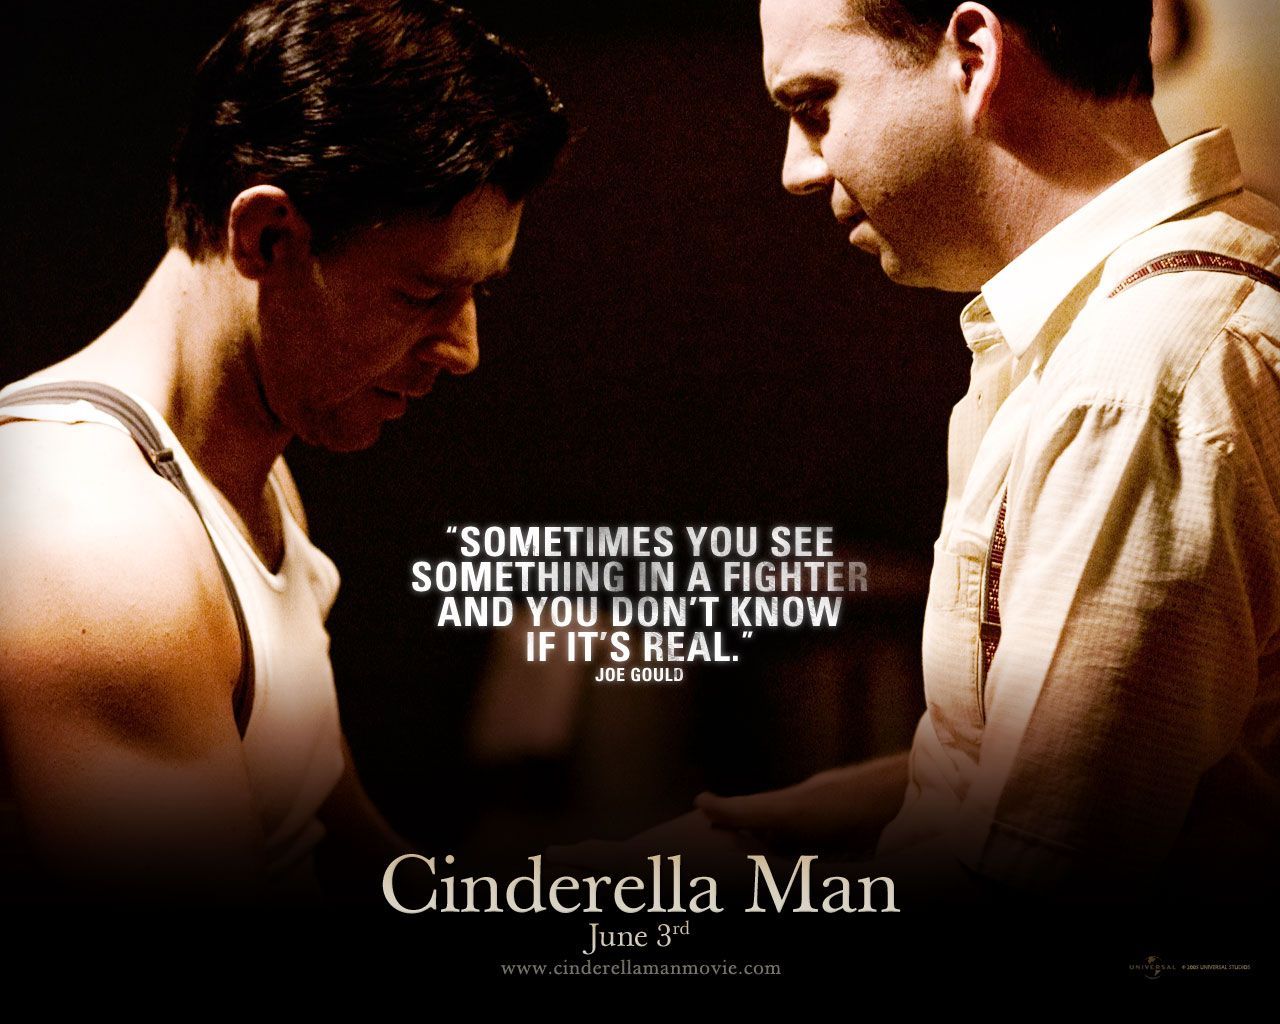 Now Playing, Cinderella Man (2005). Favorite movie quotes, Movie quotes, Sports movie